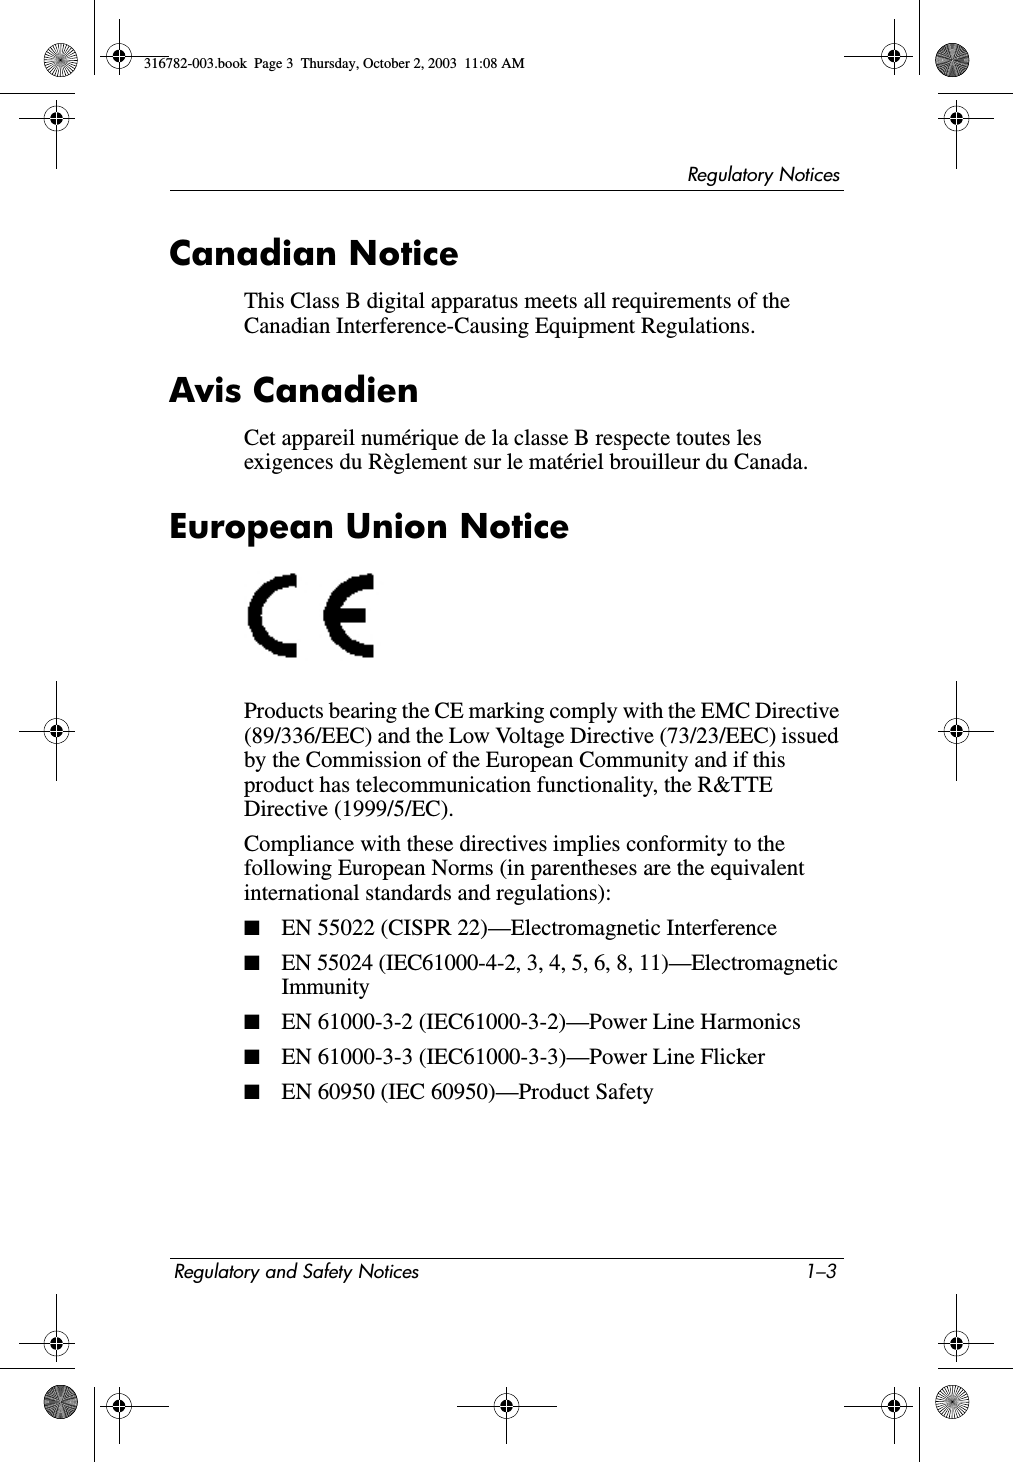 Regulatory NoticesRegulatory and Safety Notices 1–3Canadian NoticeThis Class B digital apparatus meets all requirements of the Canadian Interference-Causing Equipment Regulations.Avis CanadienCet appareil numérique de la classe B respecte toutes les exigences du Règlement sur le matériel brouilleur du Canada.European Union NoticeProducts bearing the CE marking comply with the EMC Directive (89/336/EEC) and the Low Voltage Directive (73/23/EEC) issued by the Commission of the European Community and if this product has telecommunication functionality, the R&amp;TTE Directive (1999/5/EC).Compliance with these directives implies conformity to the following European Norms (in parentheses are the equivalent international standards and regulations):■EN 55022 (CISPR 22)—Electromagnetic Interference ■EN 55024 (IEC61000-4-2, 3, 4, 5, 6, 8, 11)—Electromagnetic Immunity■EN 61000-3-2 (IEC61000-3-2)—Power Line Harmonics■EN 61000-3-3 (IEC61000-3-3)—Power Line Flicker■EN 60950 (IEC 60950)—Product Safety316782-003.book  Page 3  Thursday, October 2, 2003  11:08 AM